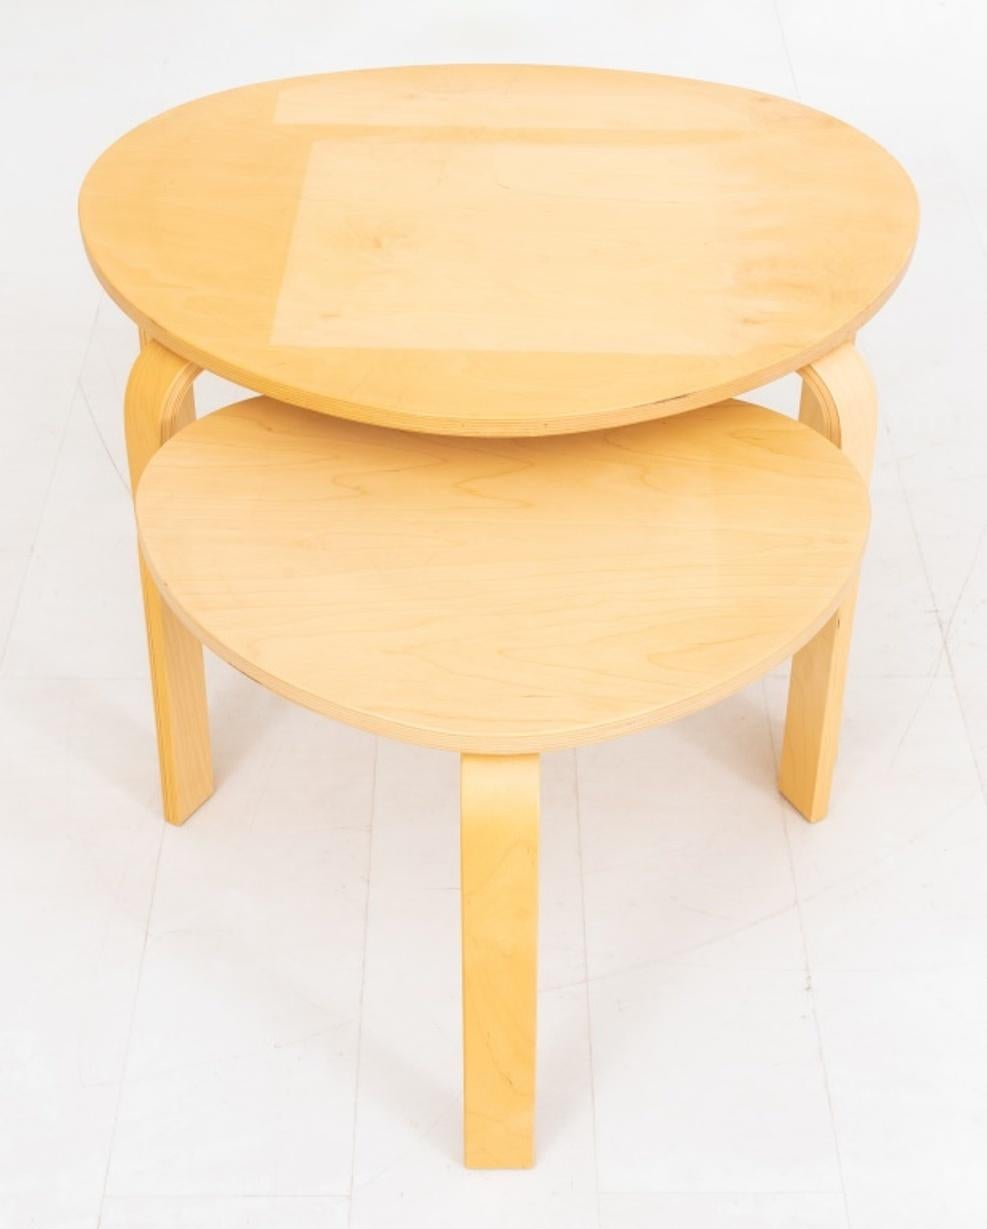 Alvar Aalto (Finnish, 1898 - 1976) for Artek Mid-Century Modern set of two side or occasional tables in rounded triangular shape with natural wood top and three legs, unmarked.

Dimensions: Tallest: 18